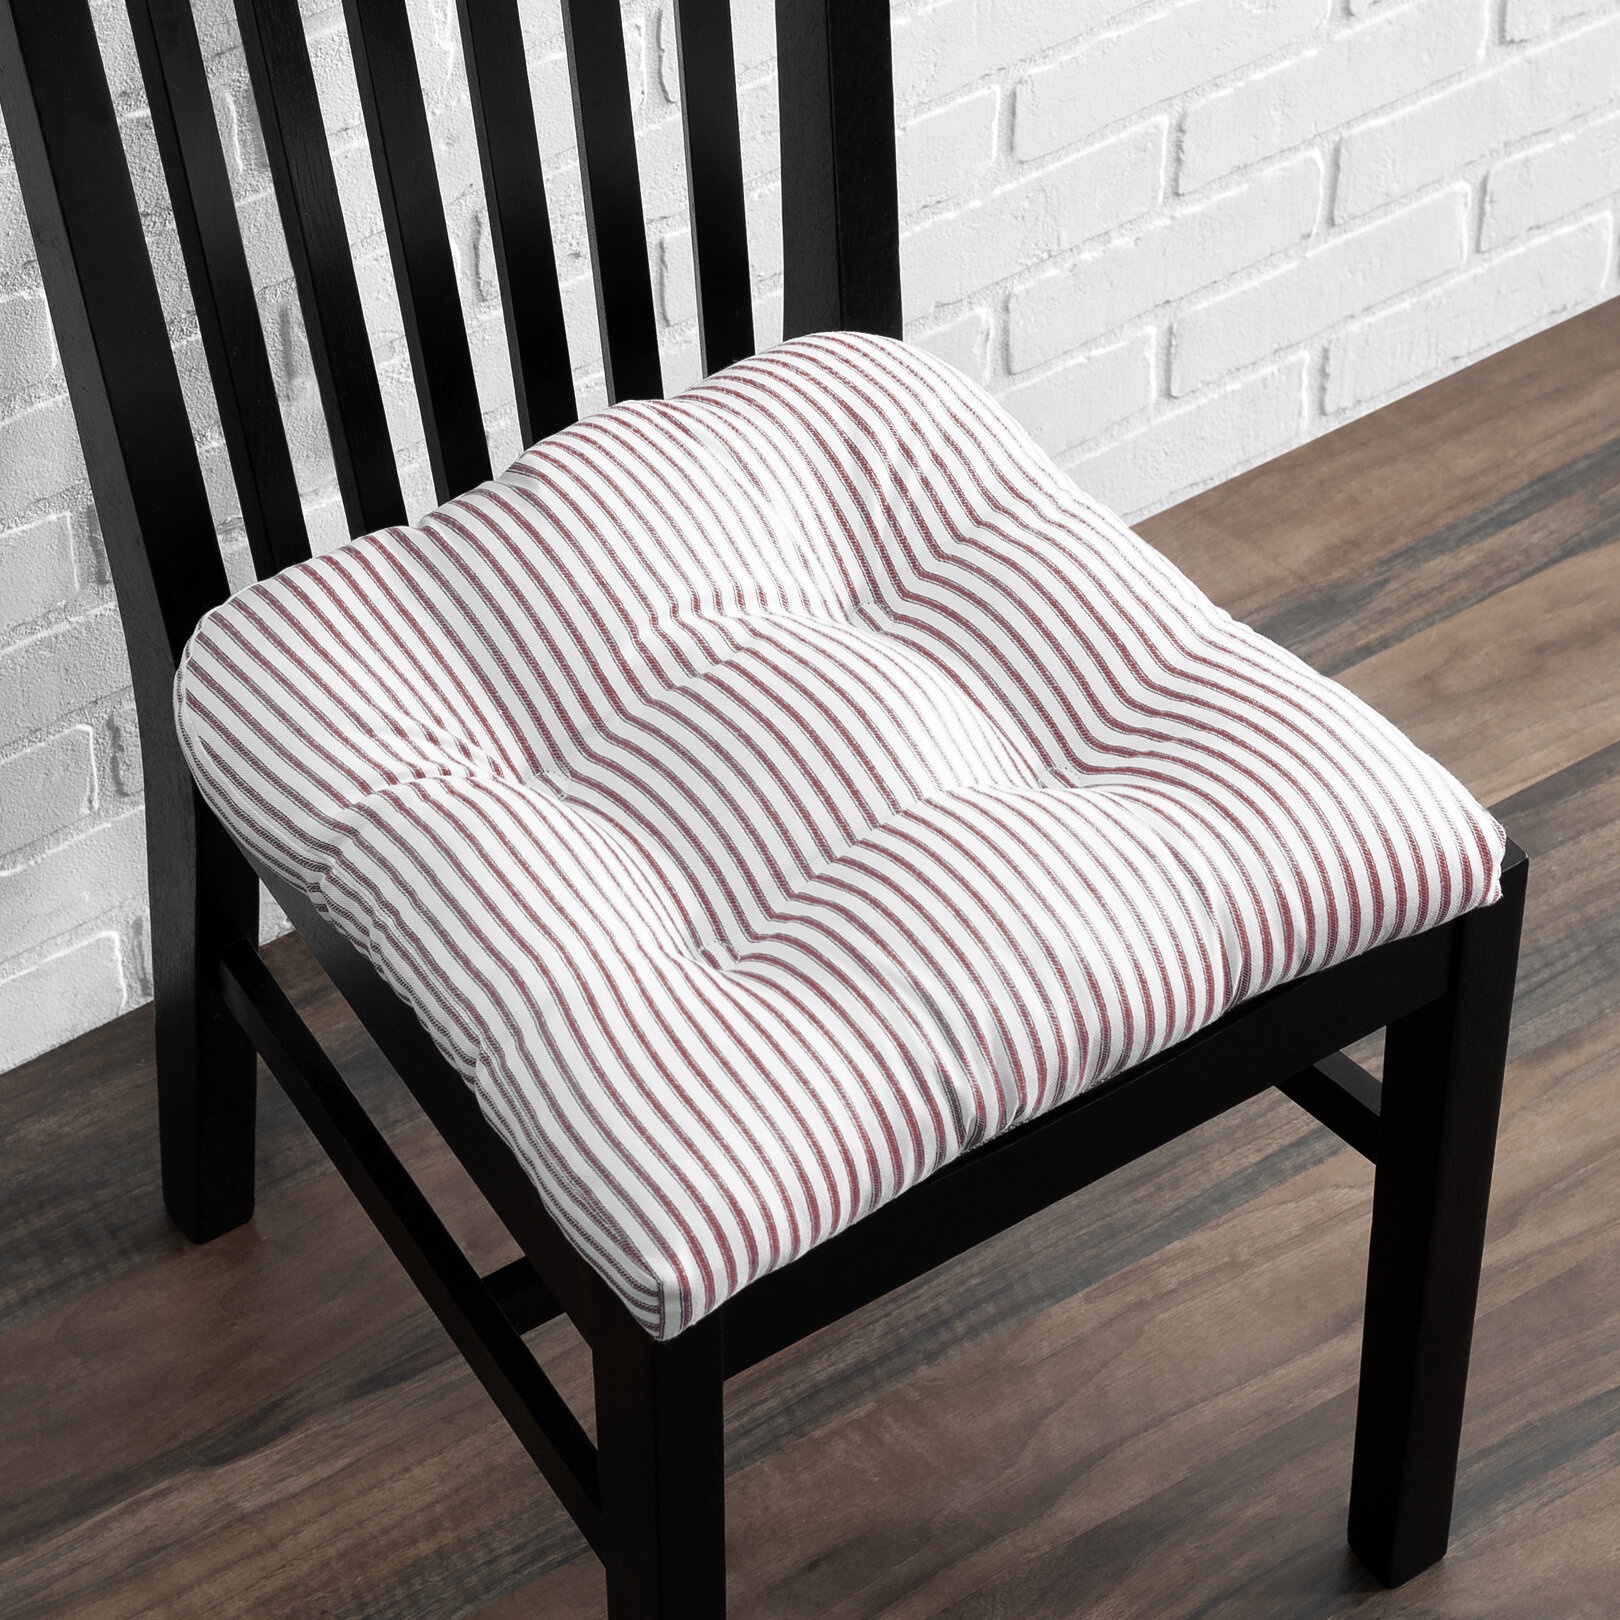 Chair Cushions for Dining Kitchen Chairs 14 Inches Seat Cushion